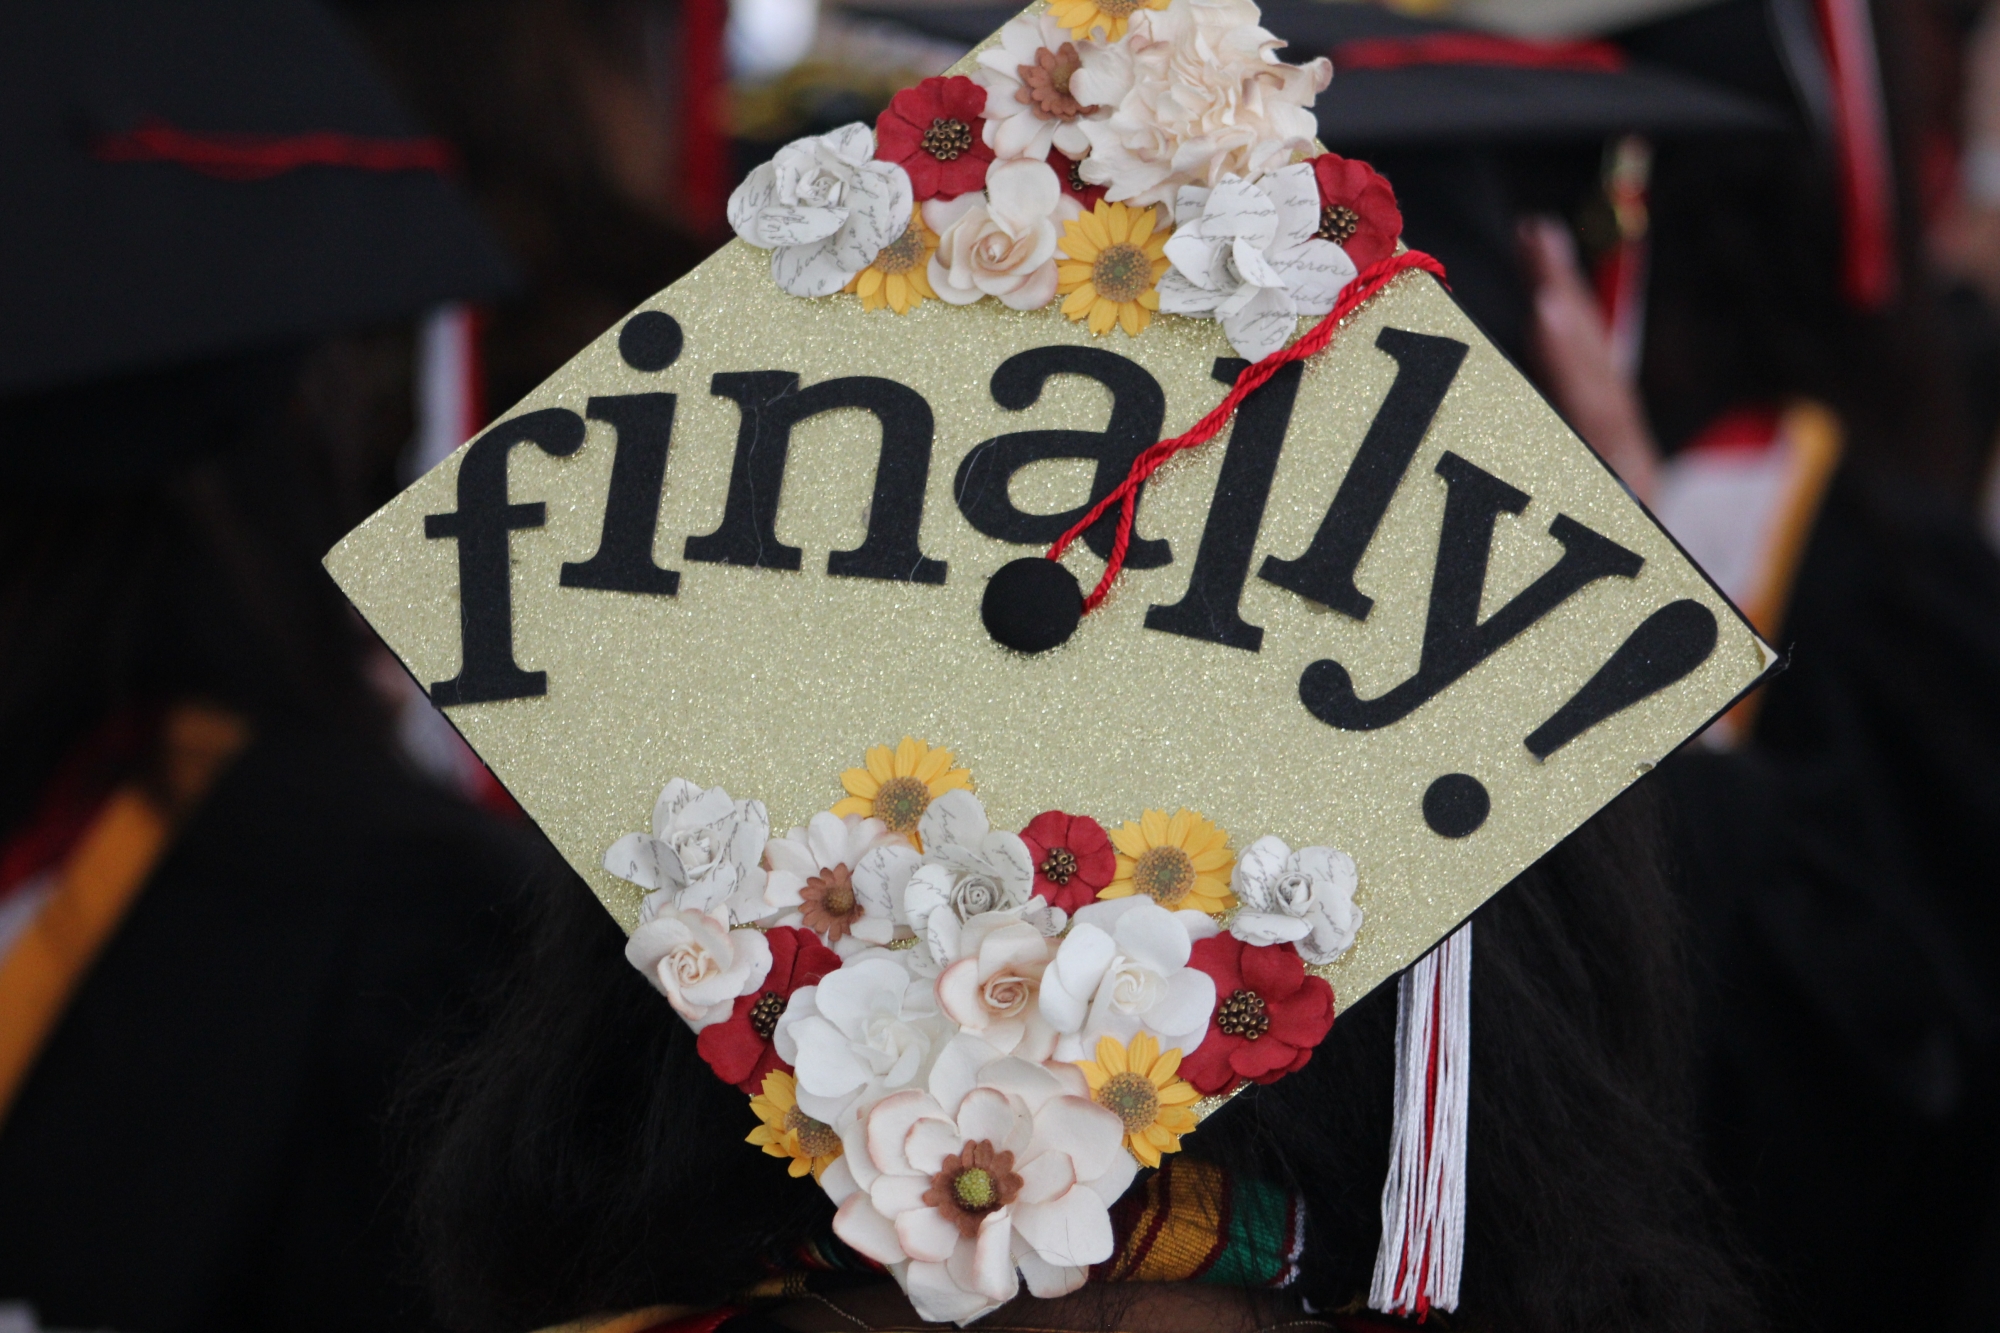 For the Classes of 2020 and 2021, the cap says it all.